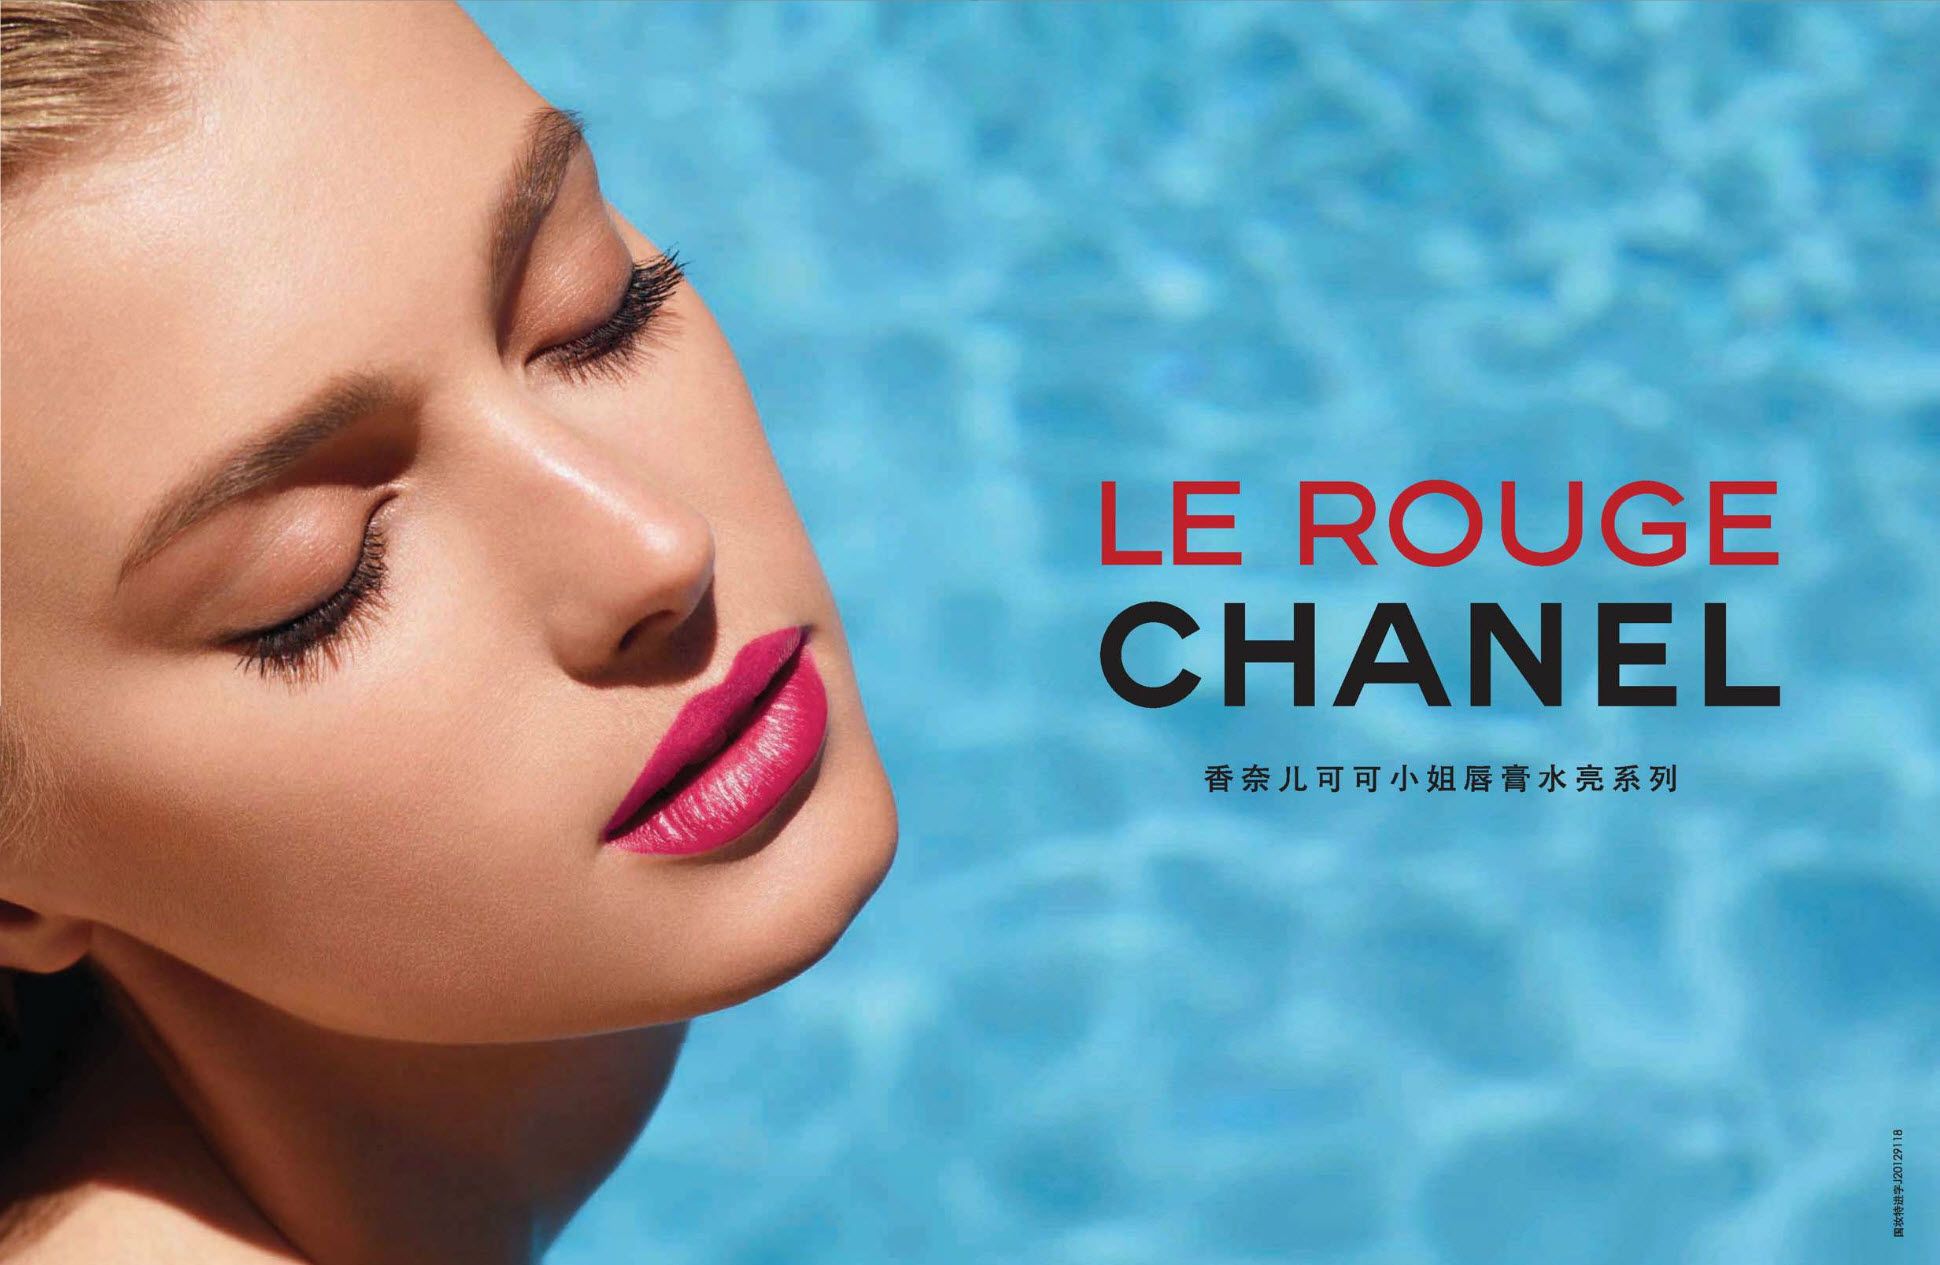 Chanel 'Le Rouge' SS 2013